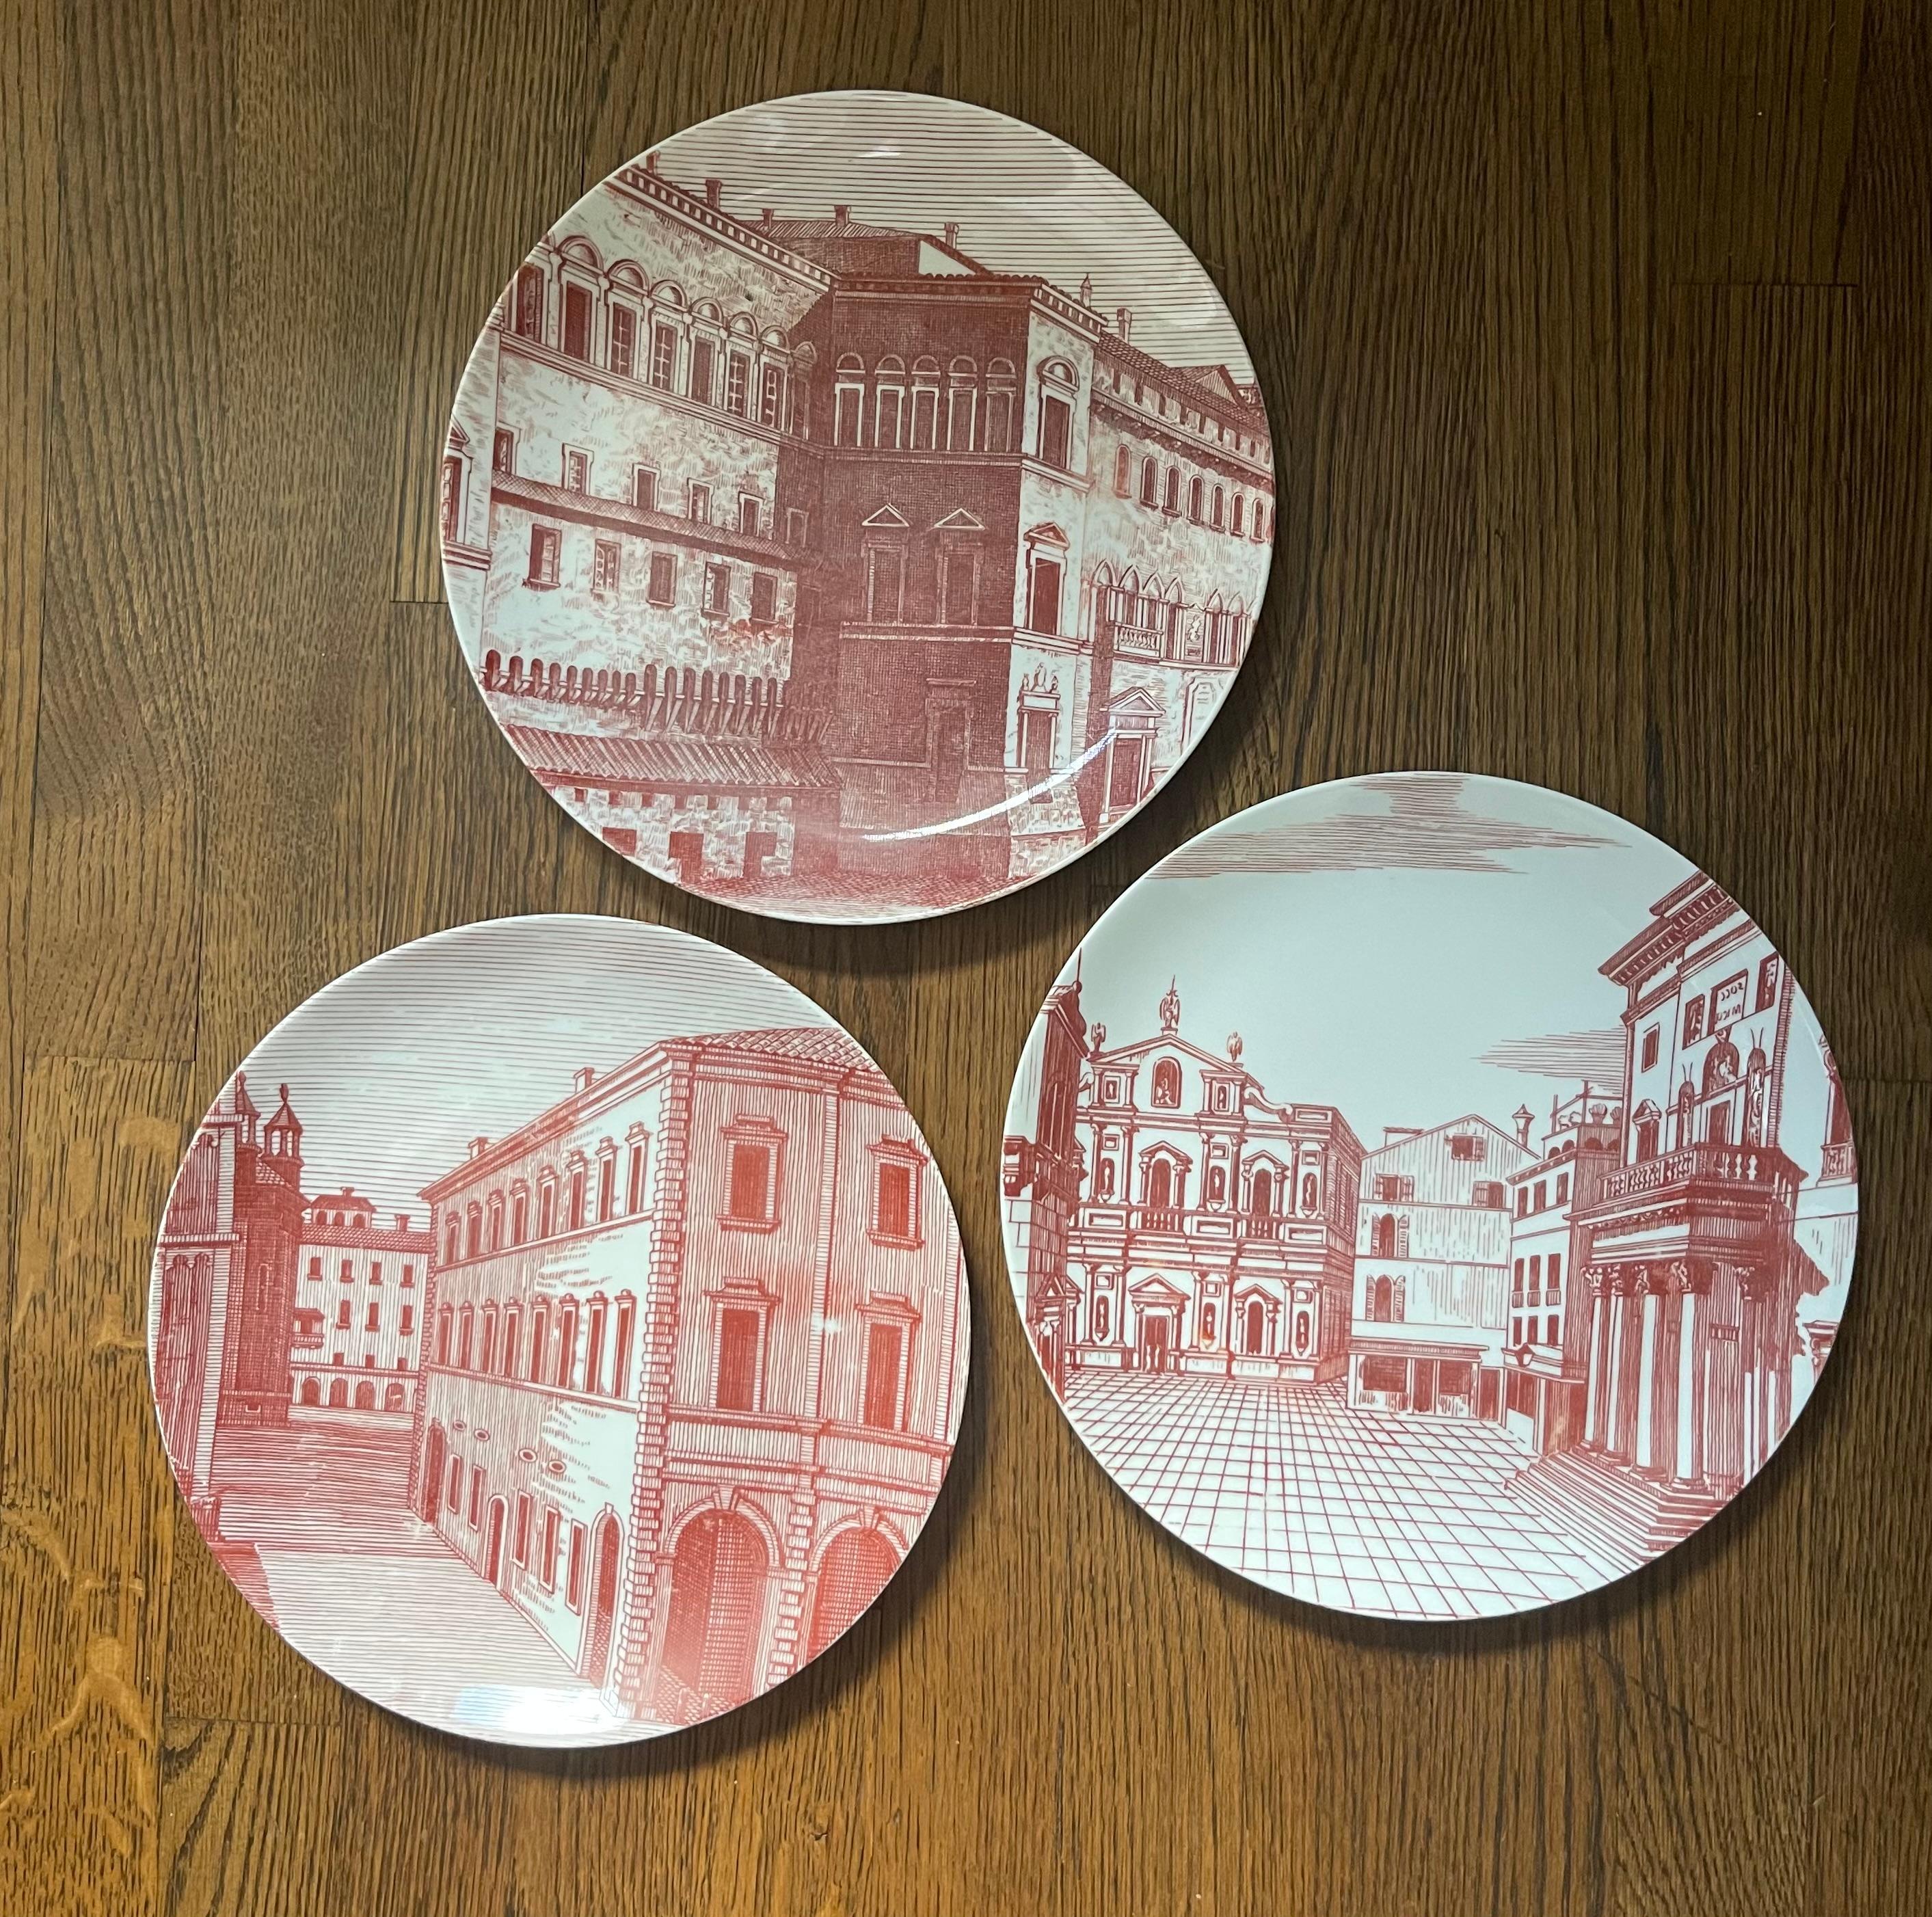 Please note:  the price is for the set of three plates. 

Three plates from Piero Fornasetti’s “Prospettiva” series.   Vintage 1950’s material, not reissued.  

A beautiful red tint edition in very good condition for their age, with only one small